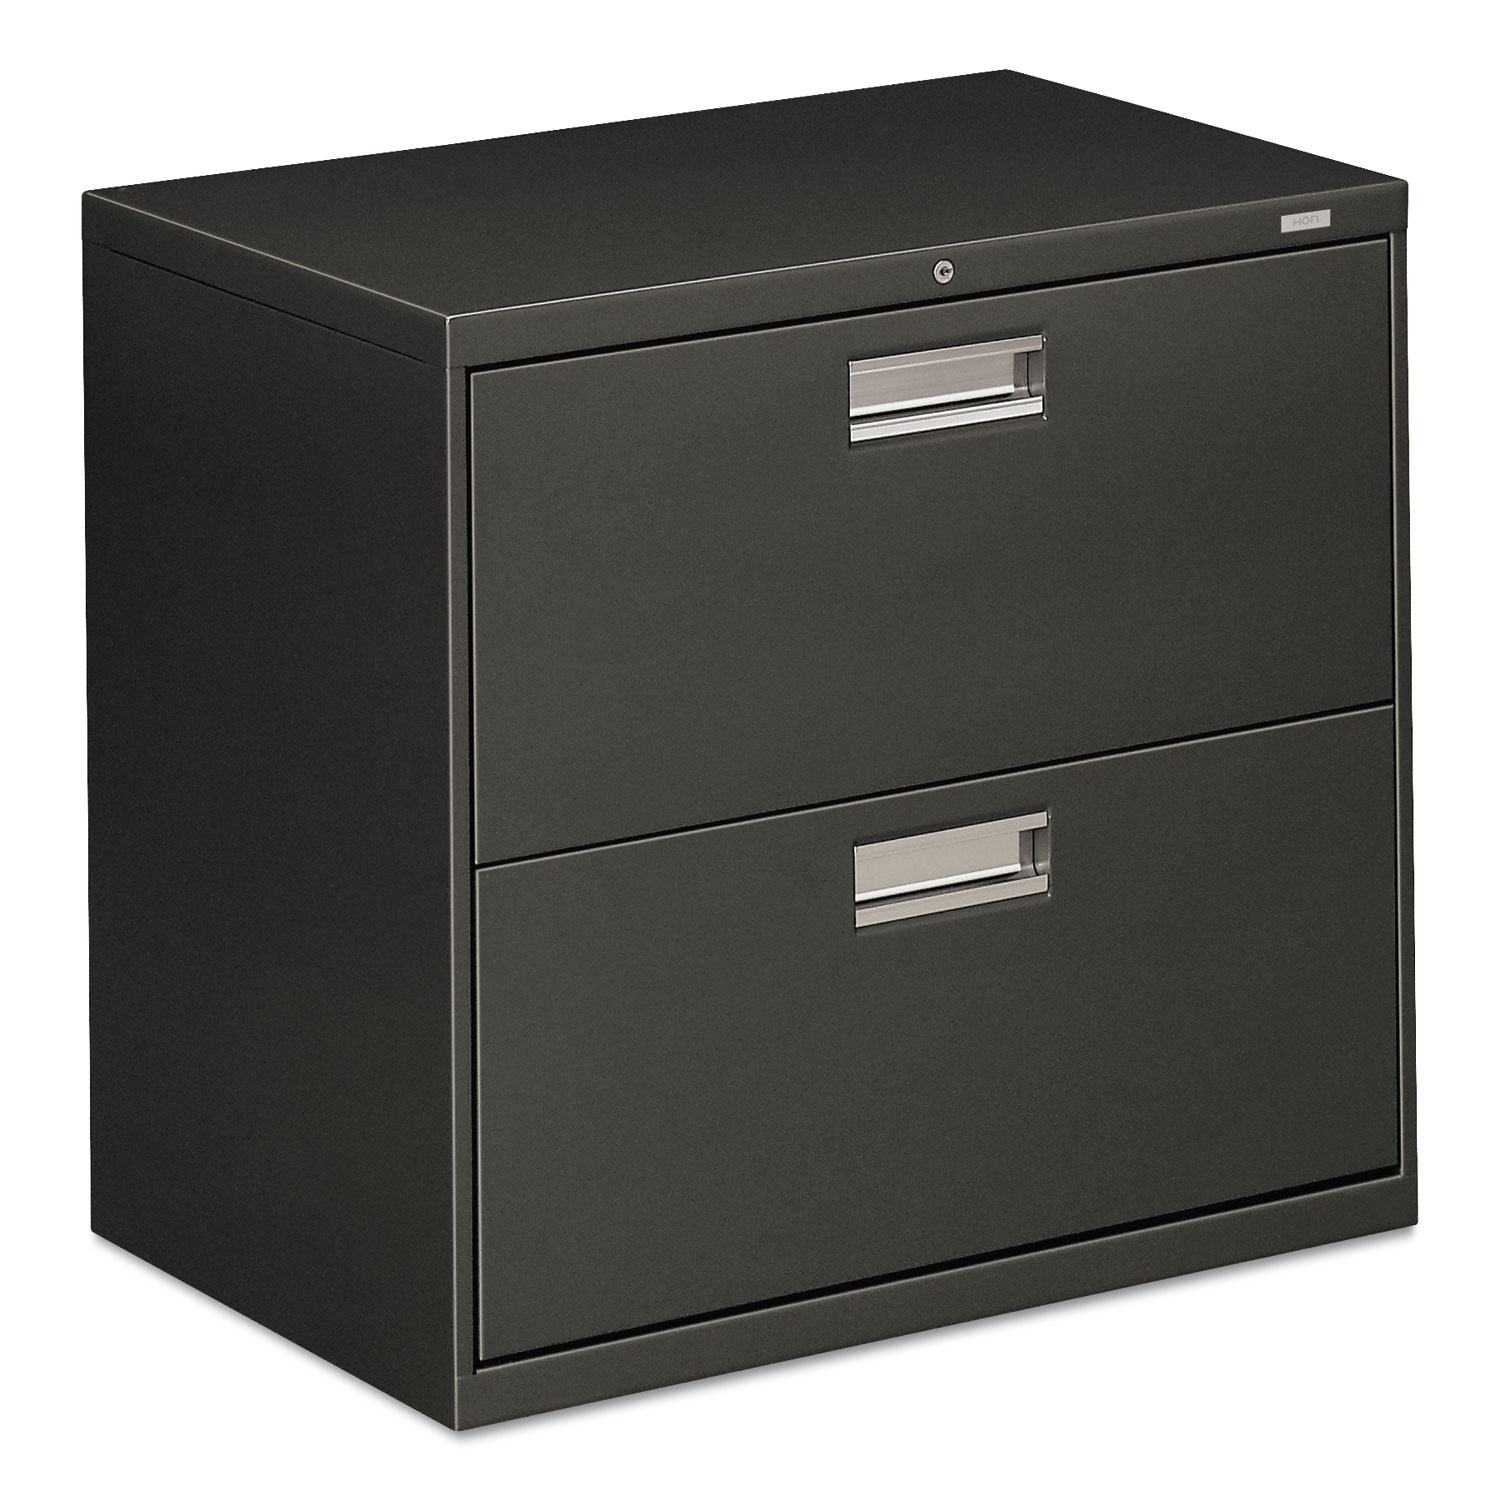  HON H672.L.S 600 Series Two-Drawer Lateral File, 30w x 18d x 28h, Charcoal (HON672LS) 